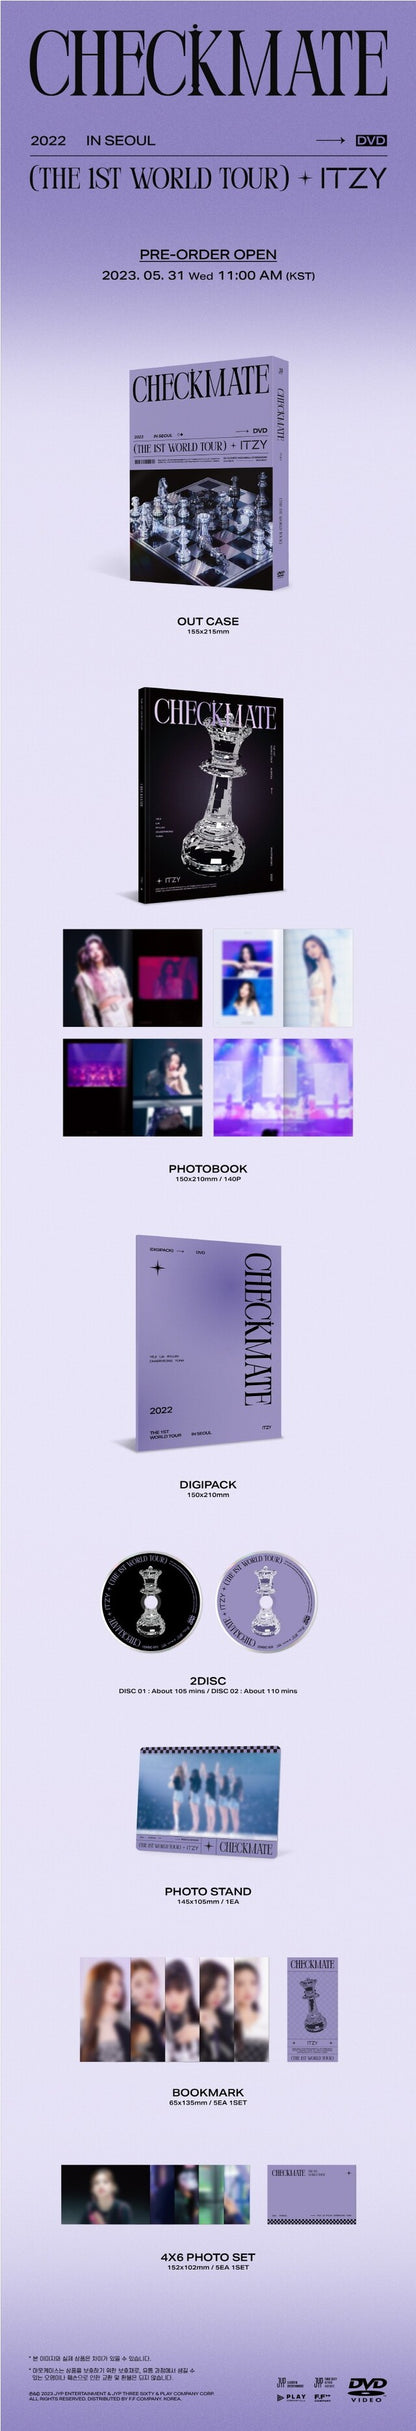 [PREORDER] JYP SHOP ITZY - 2022 ITZY THE 1ST WORLD TOUR CHECKMATE IN SEOUL 2DVD